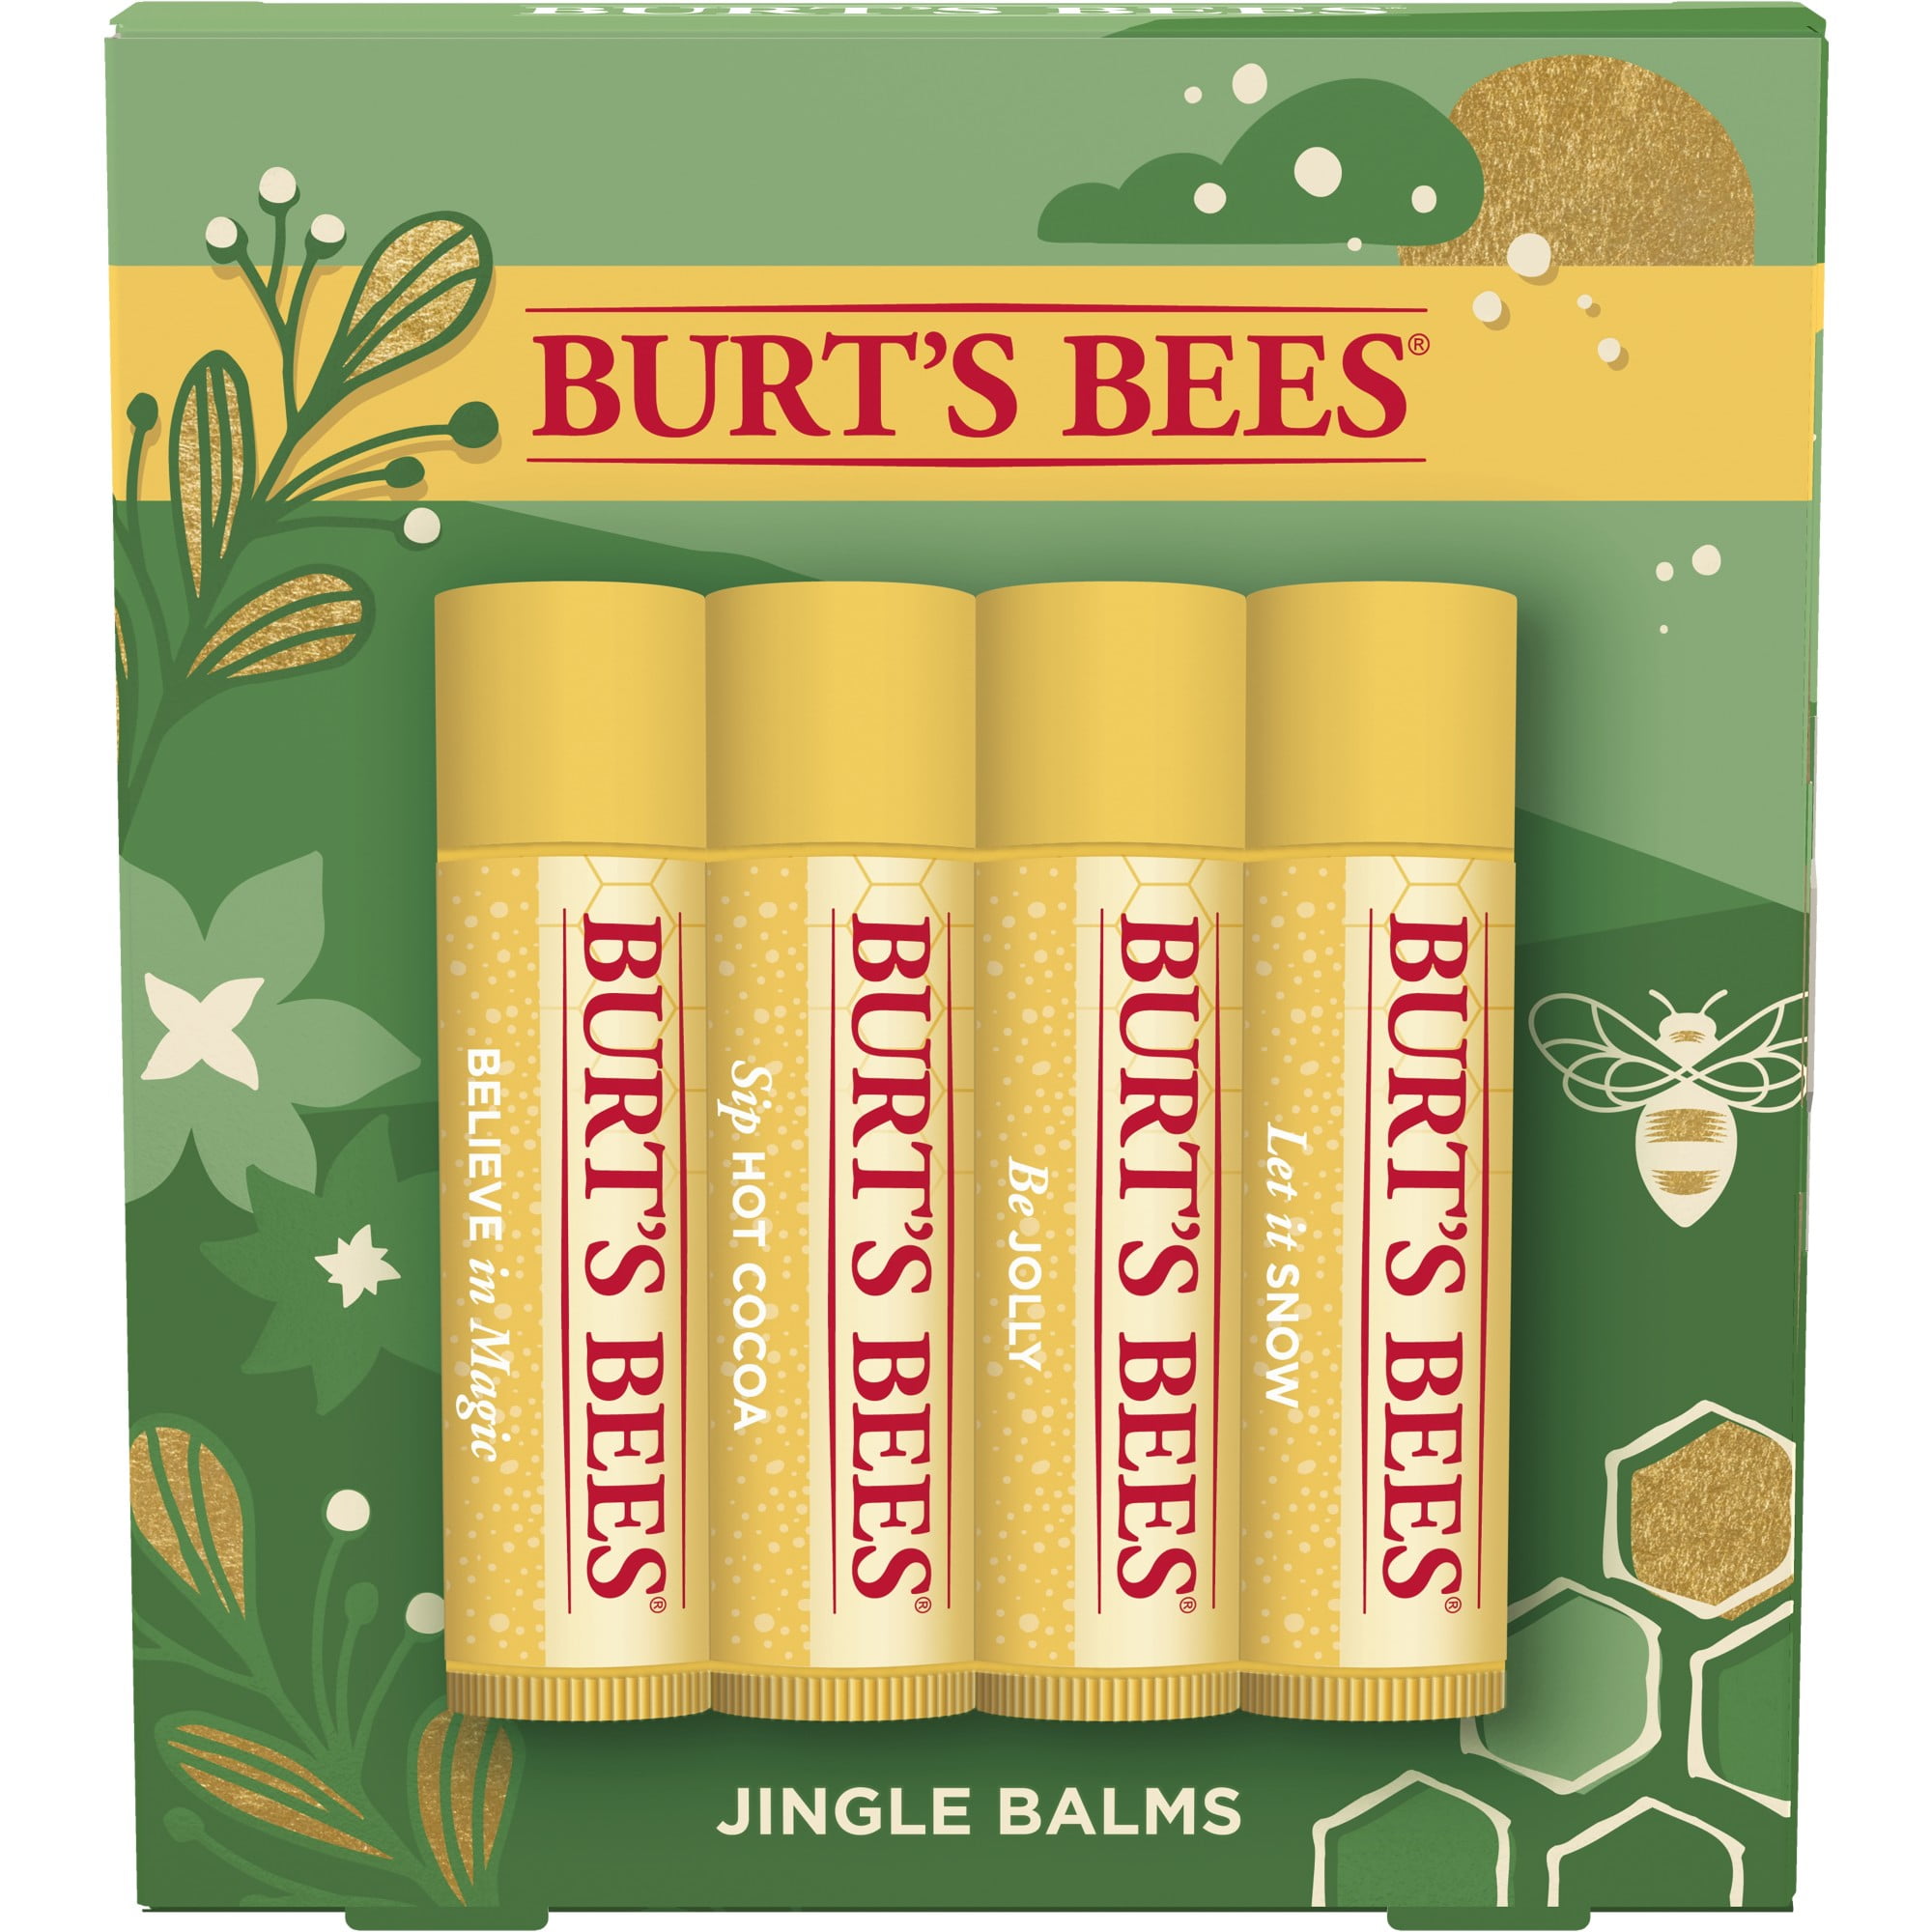 Burt's Bees Beauty: What's Worth the Purchase (& What's Not!)